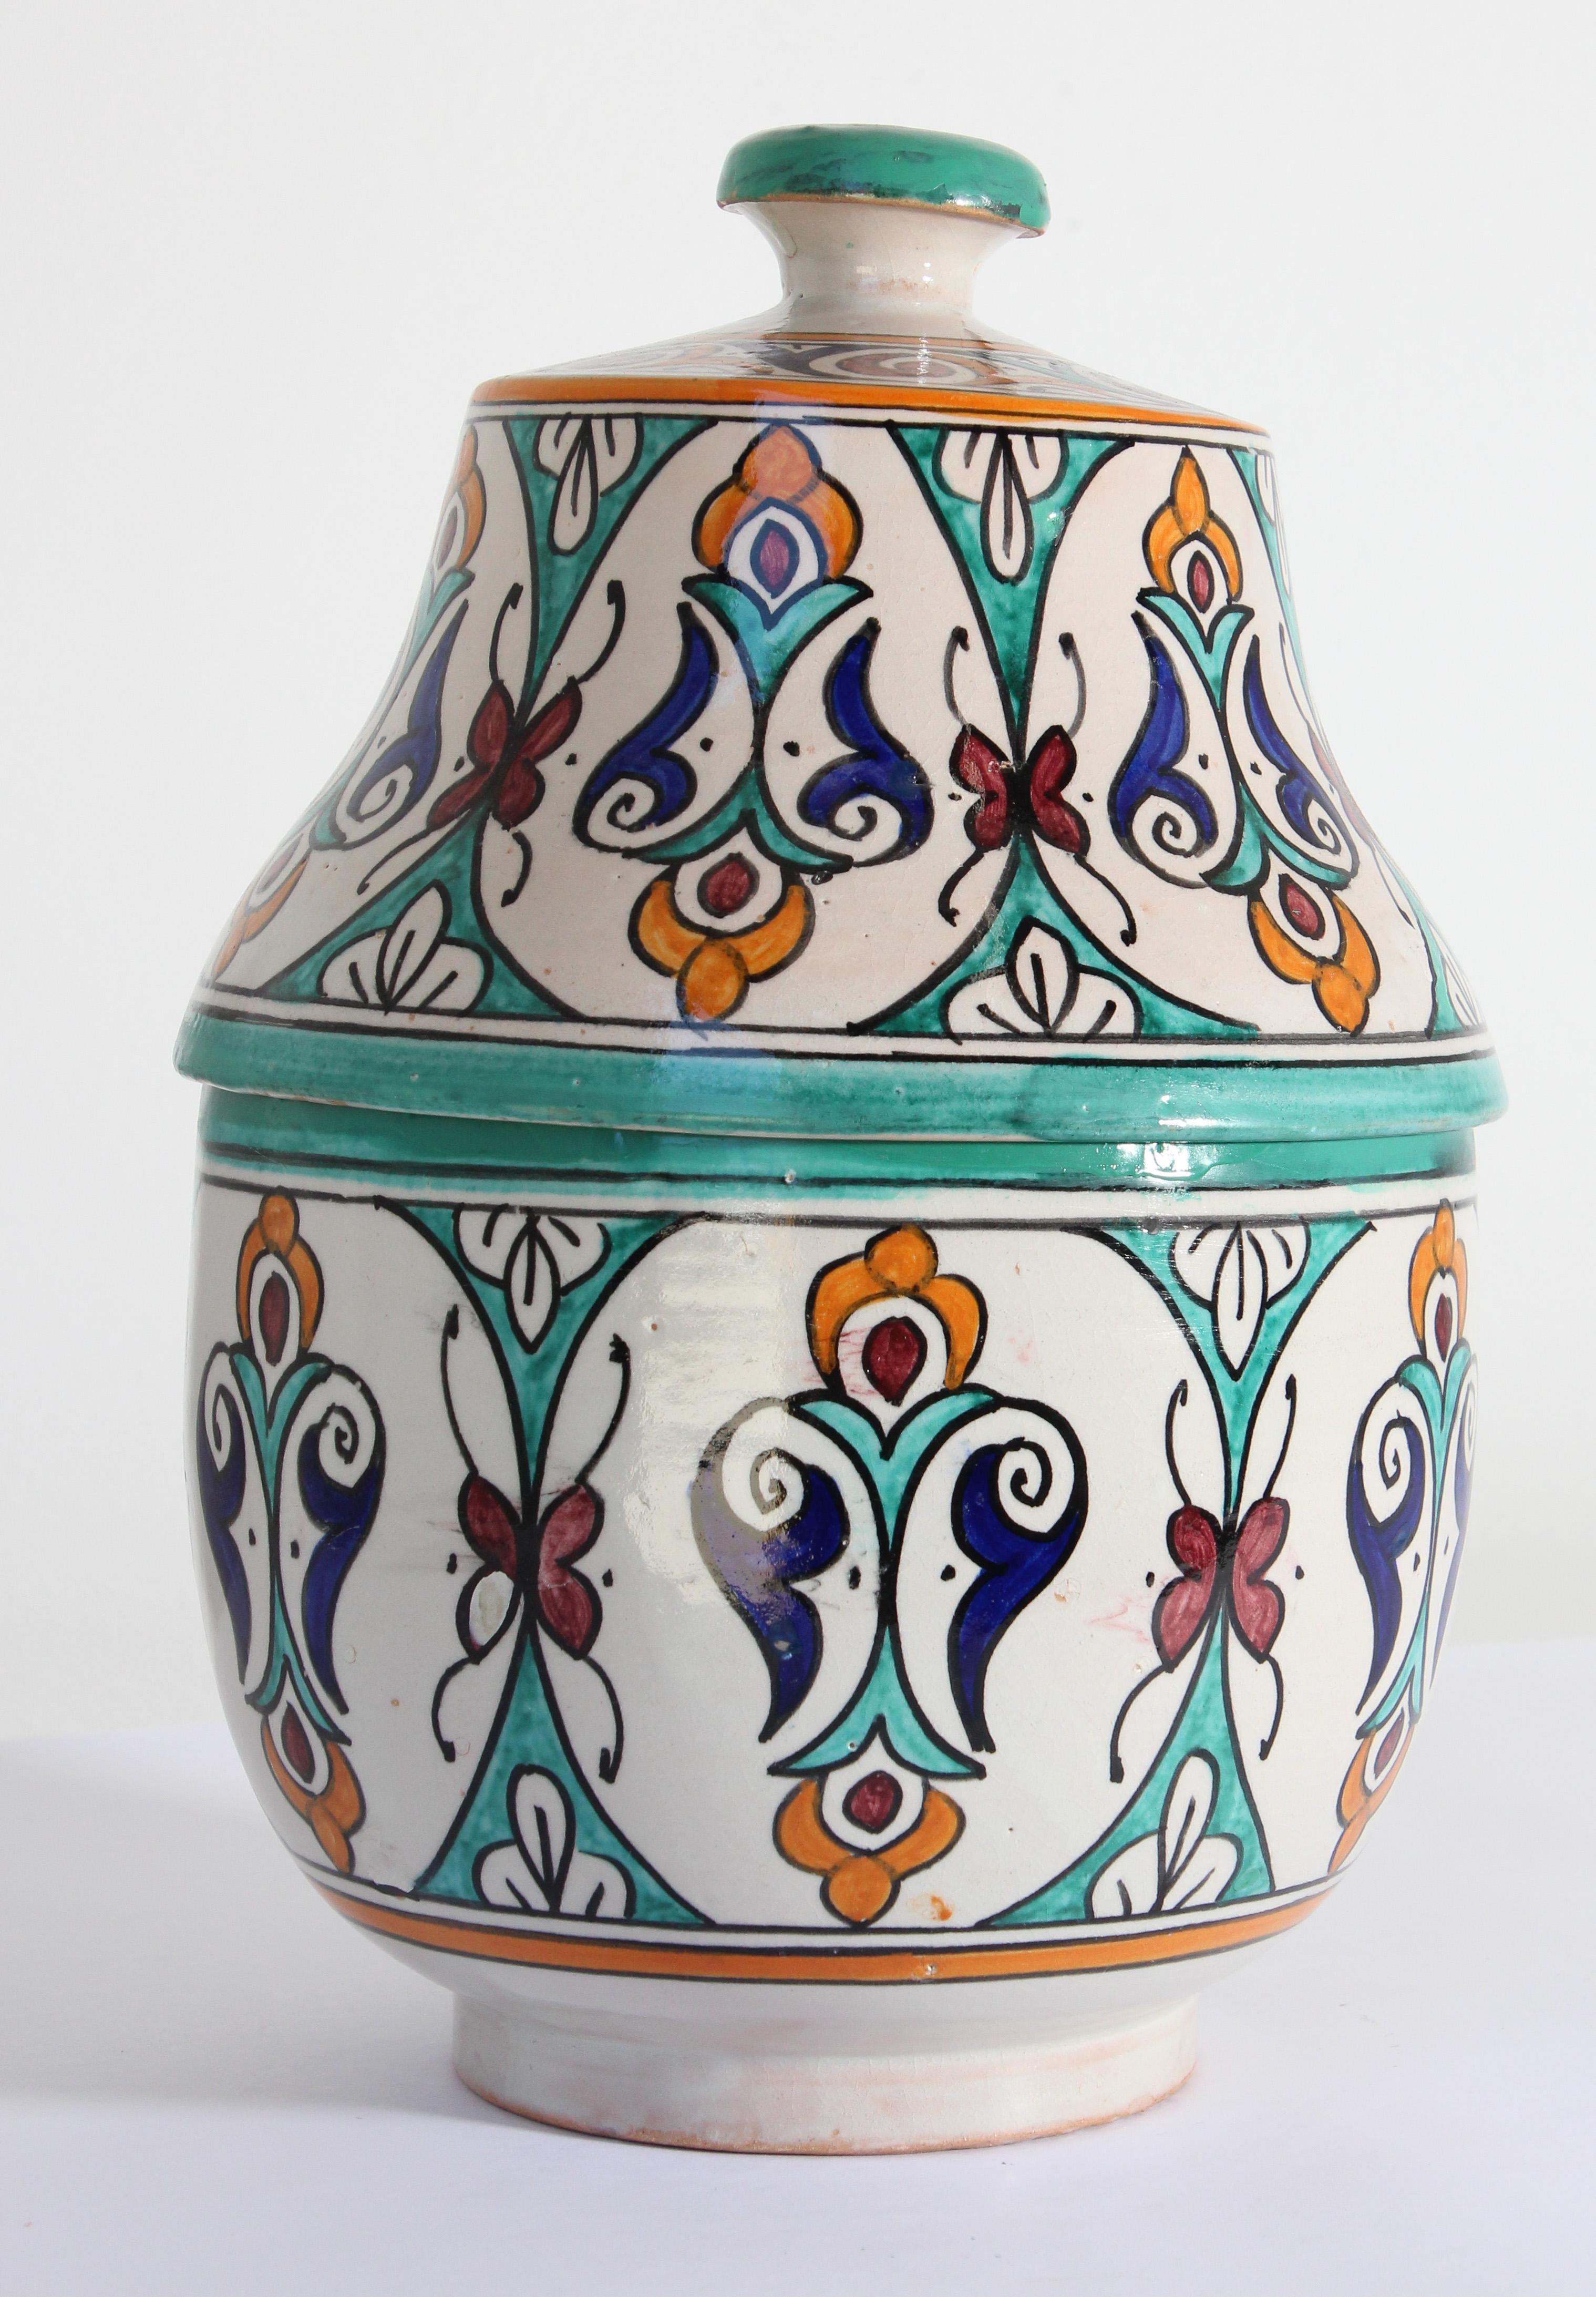 Moorish ceramic Moroccan glazed polychrome jar tureen with cover.
Hand painted ceramic Jubbana, handcrafted by skilled Moroccan artisans in Fez Morocco.
Moorish designs in turquoise, cobalt blue, teal, saffron yellow, prune and ivory